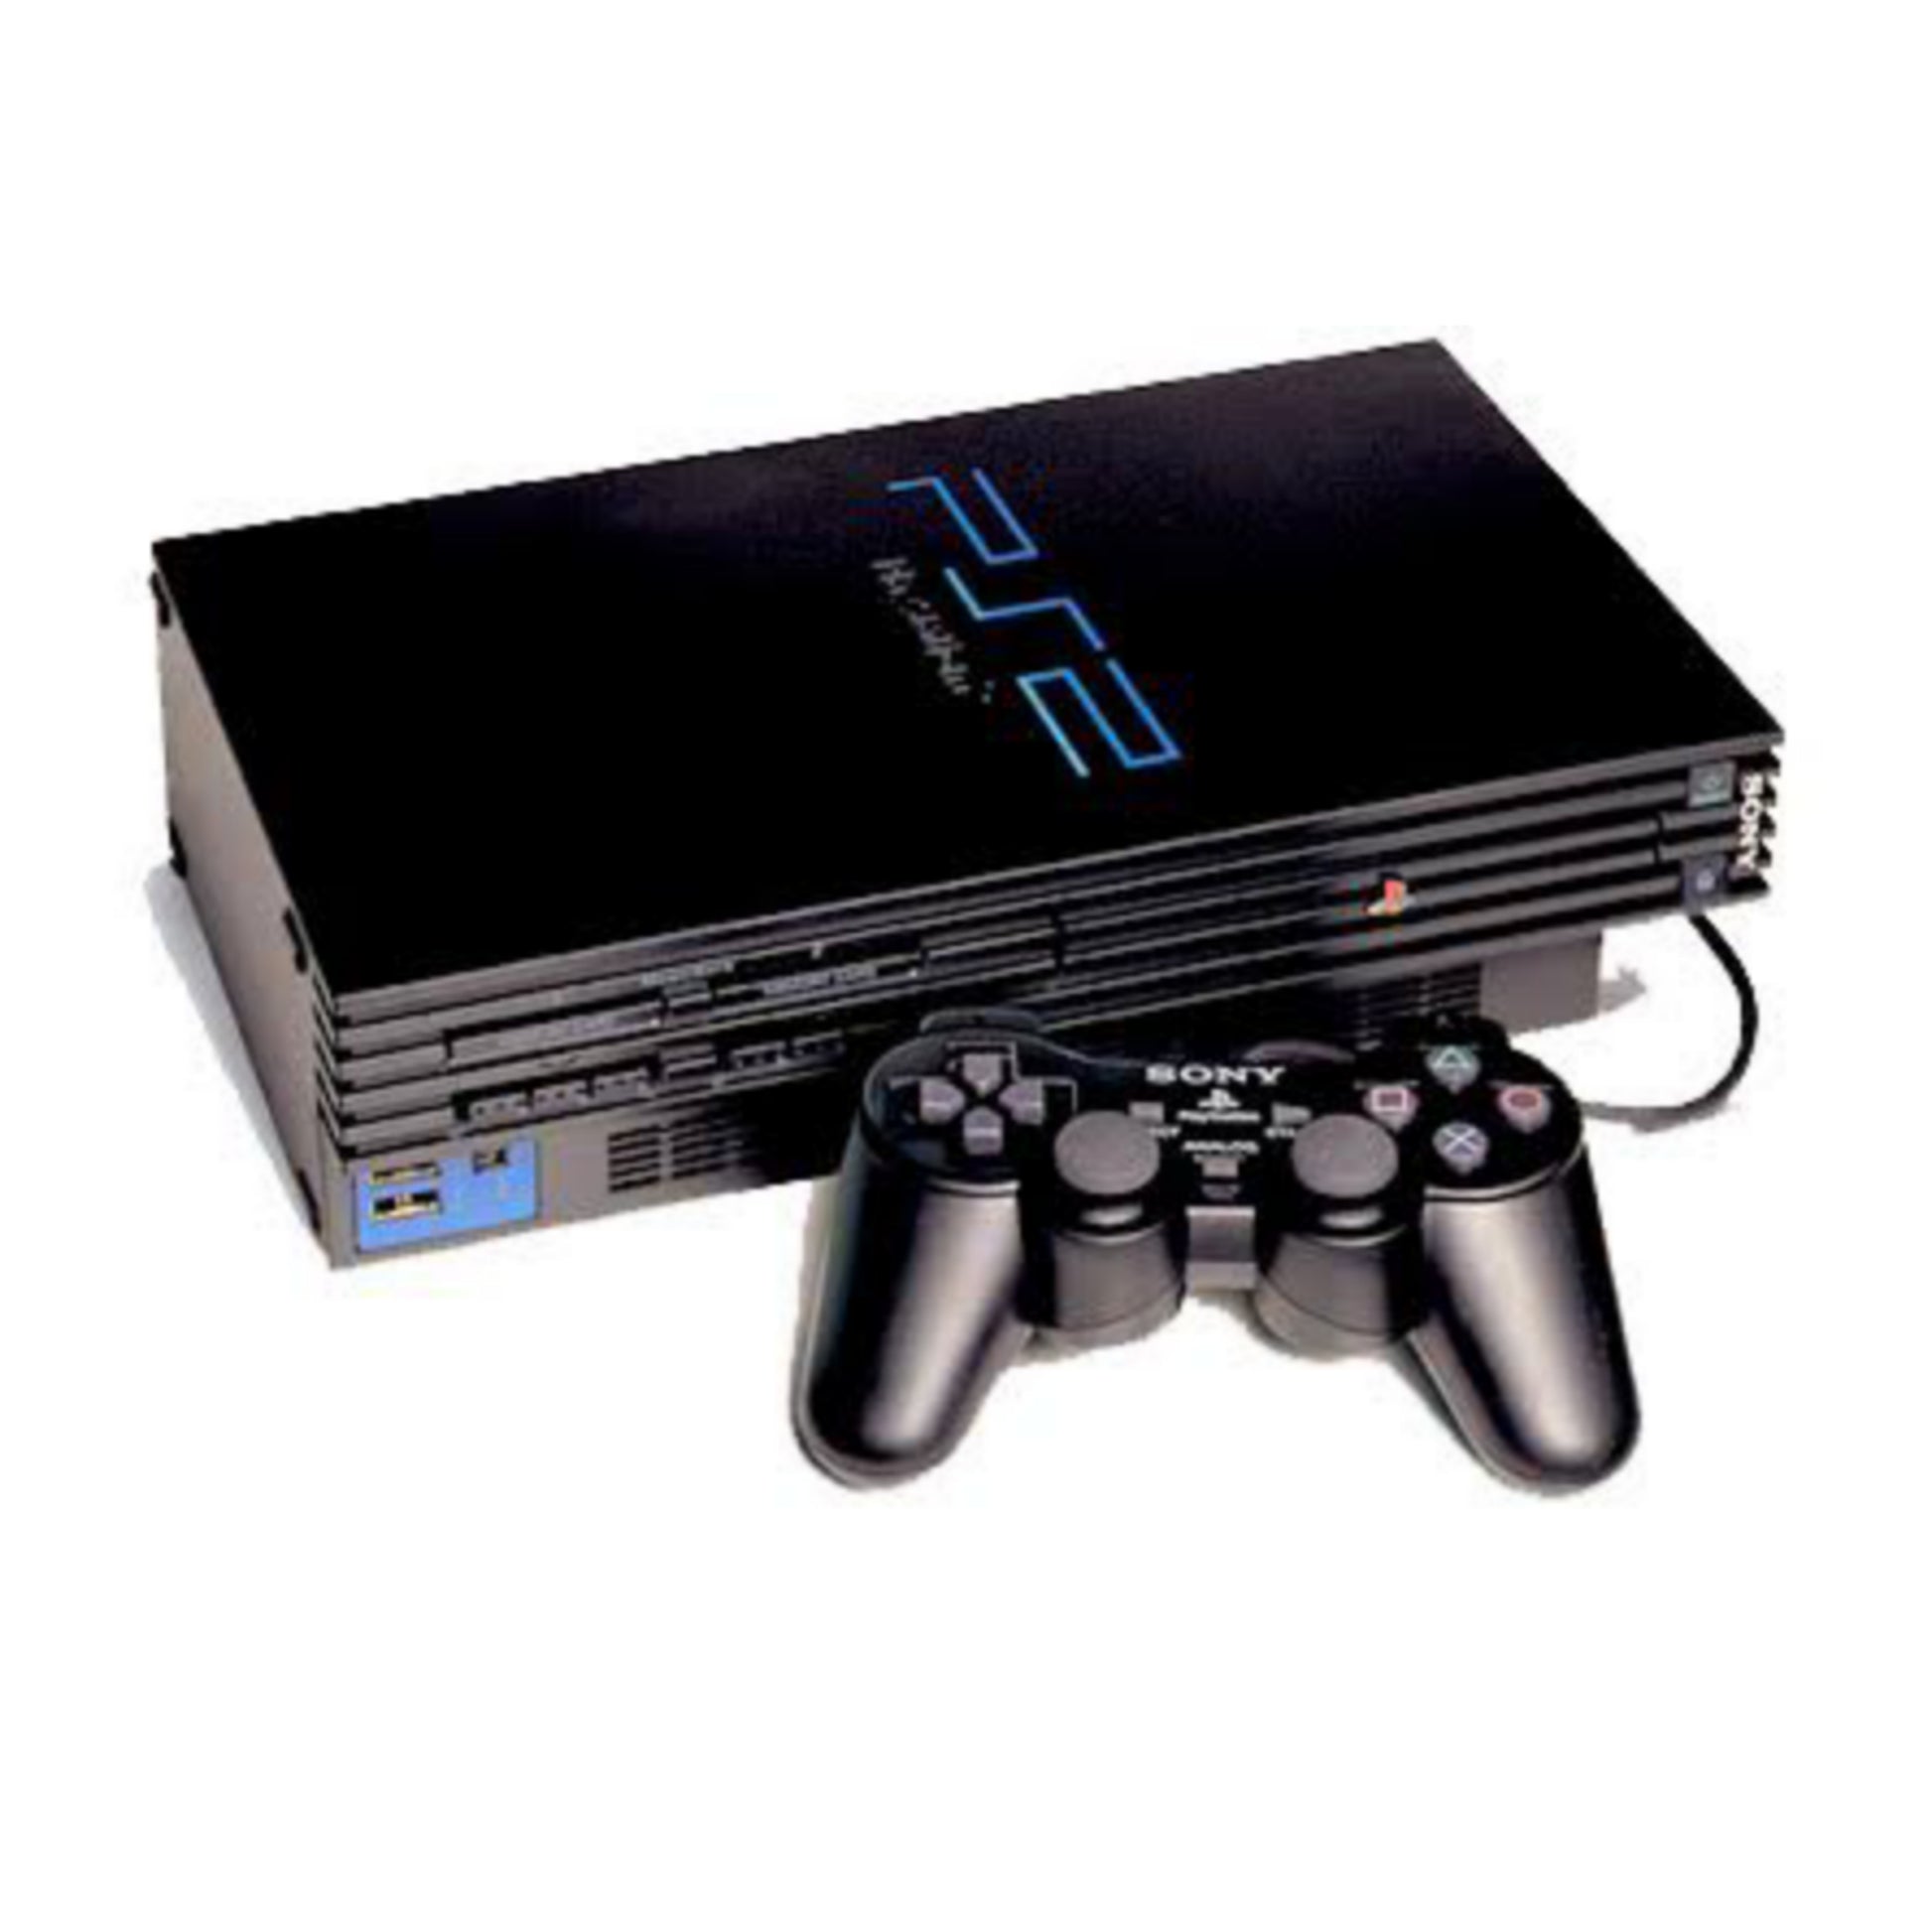 Sony Playstation 2 (PS2) Slim Game Console Complete Set with